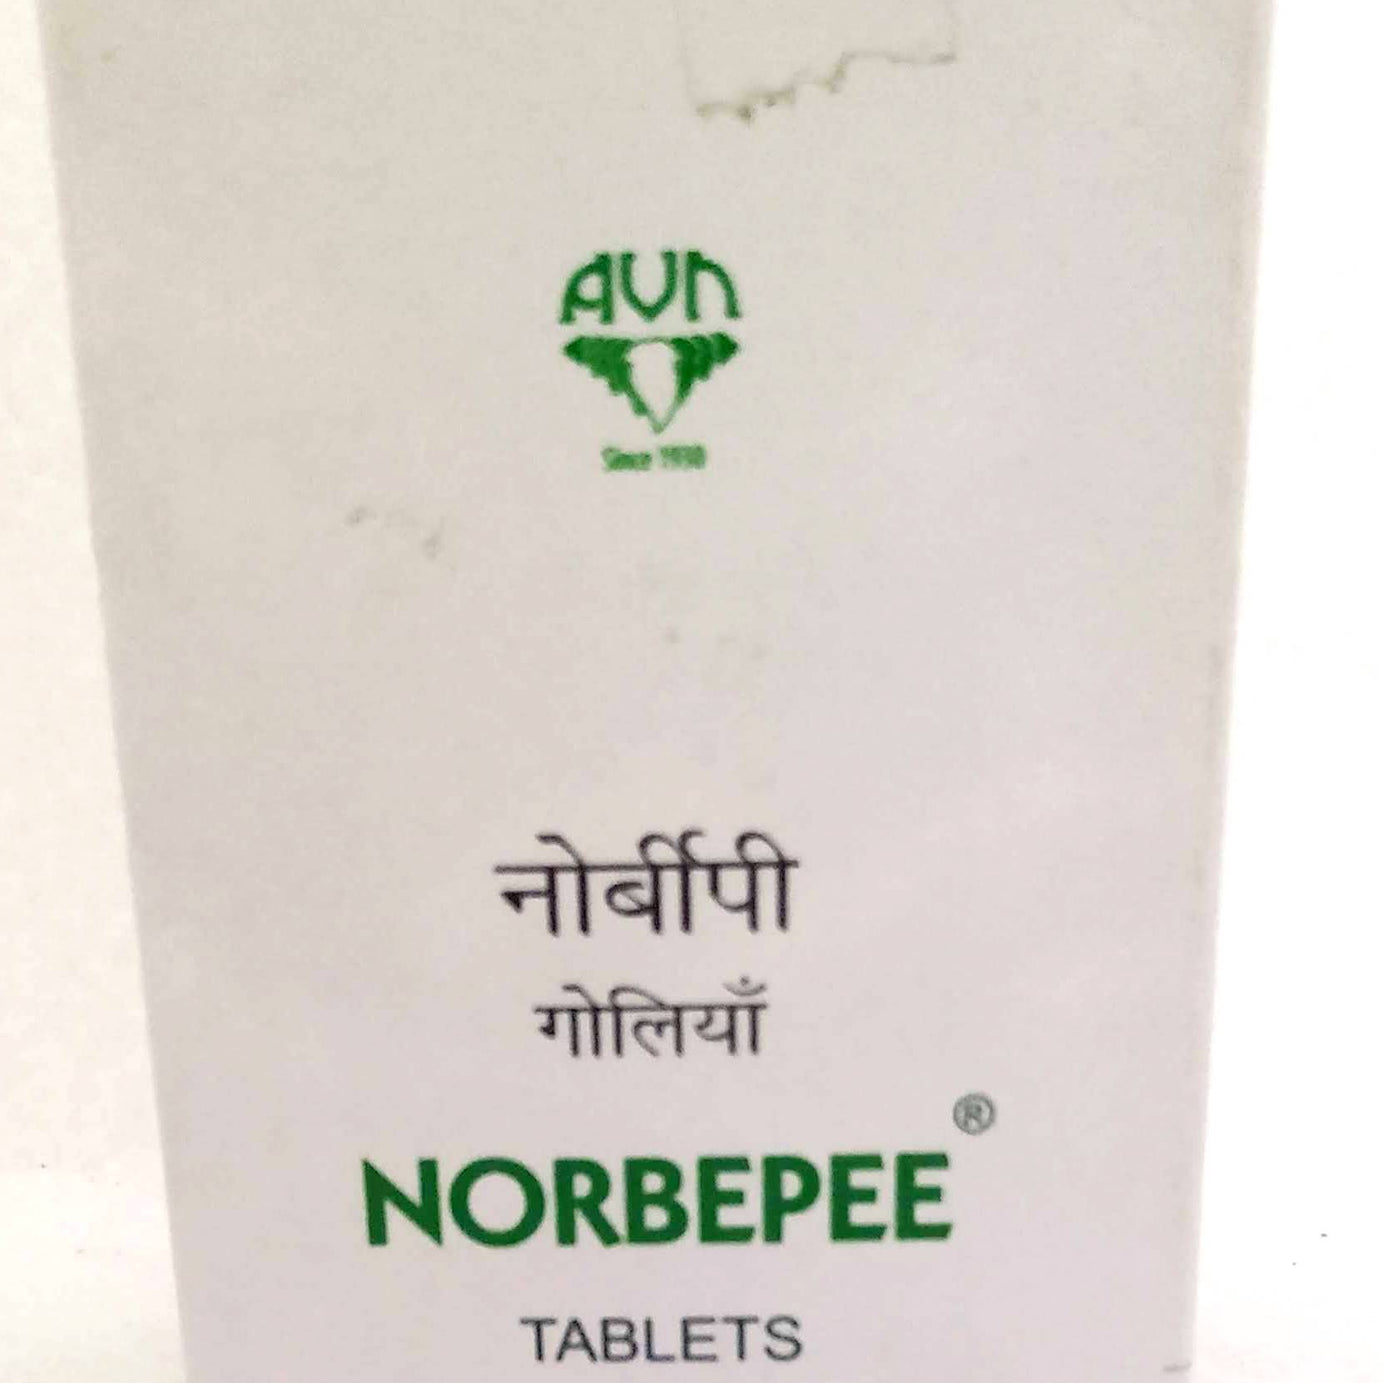 Shop AVN Norbeepee 15Tablets at price 48.00 from AVN Online - Ayush Care